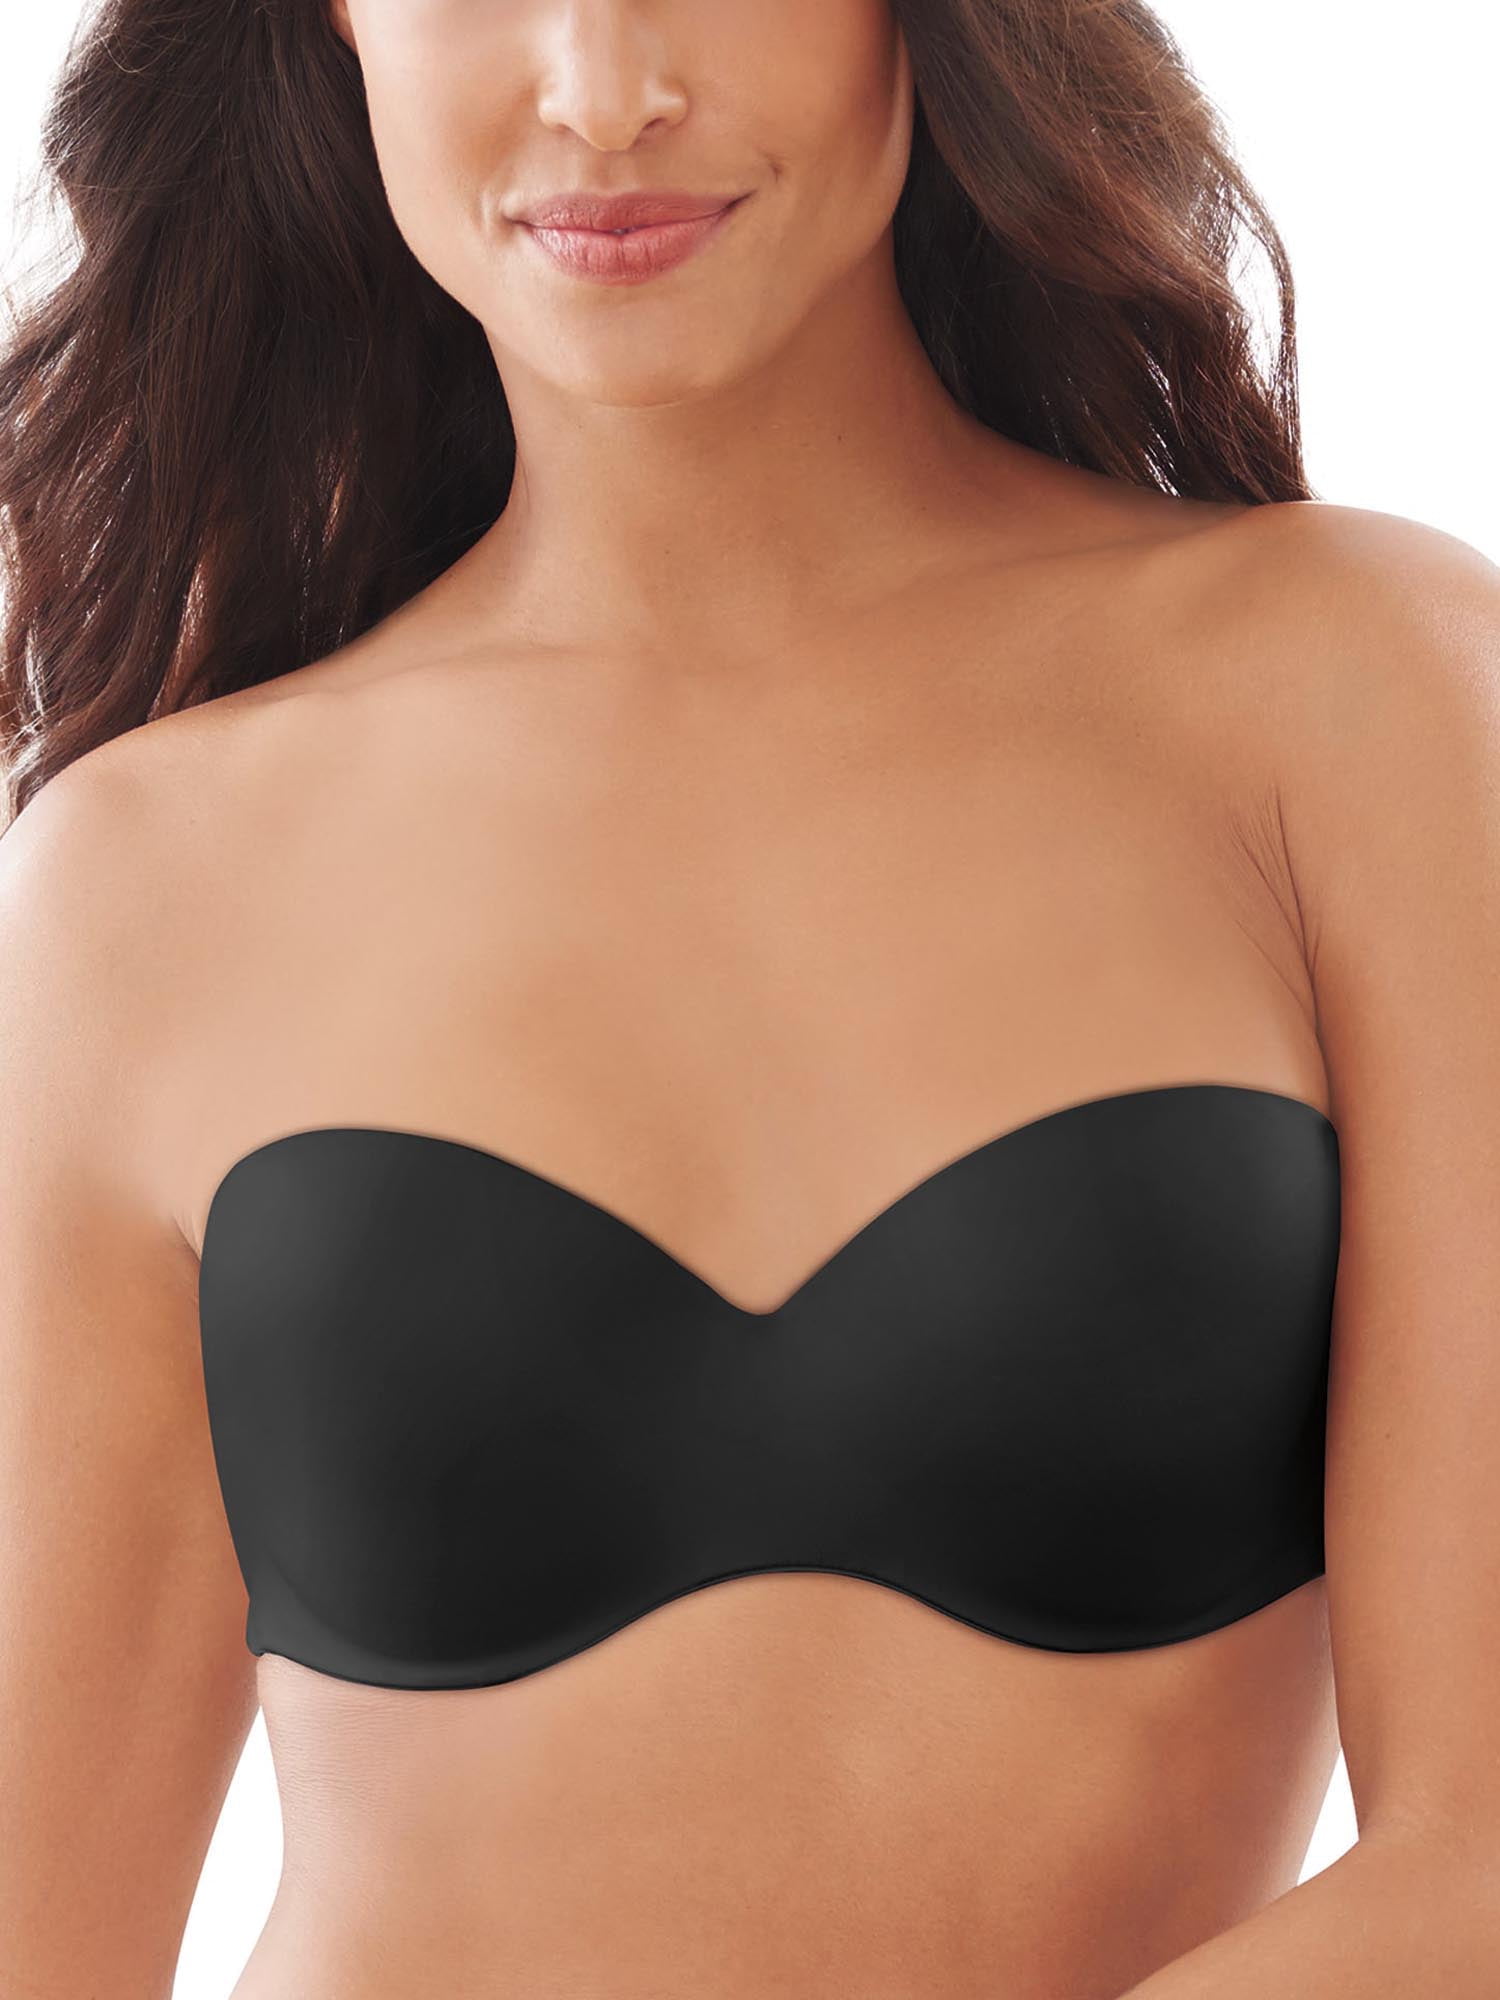 Haby 11219 Lingerie Women's Wide Base and Back Strapless Body Bra